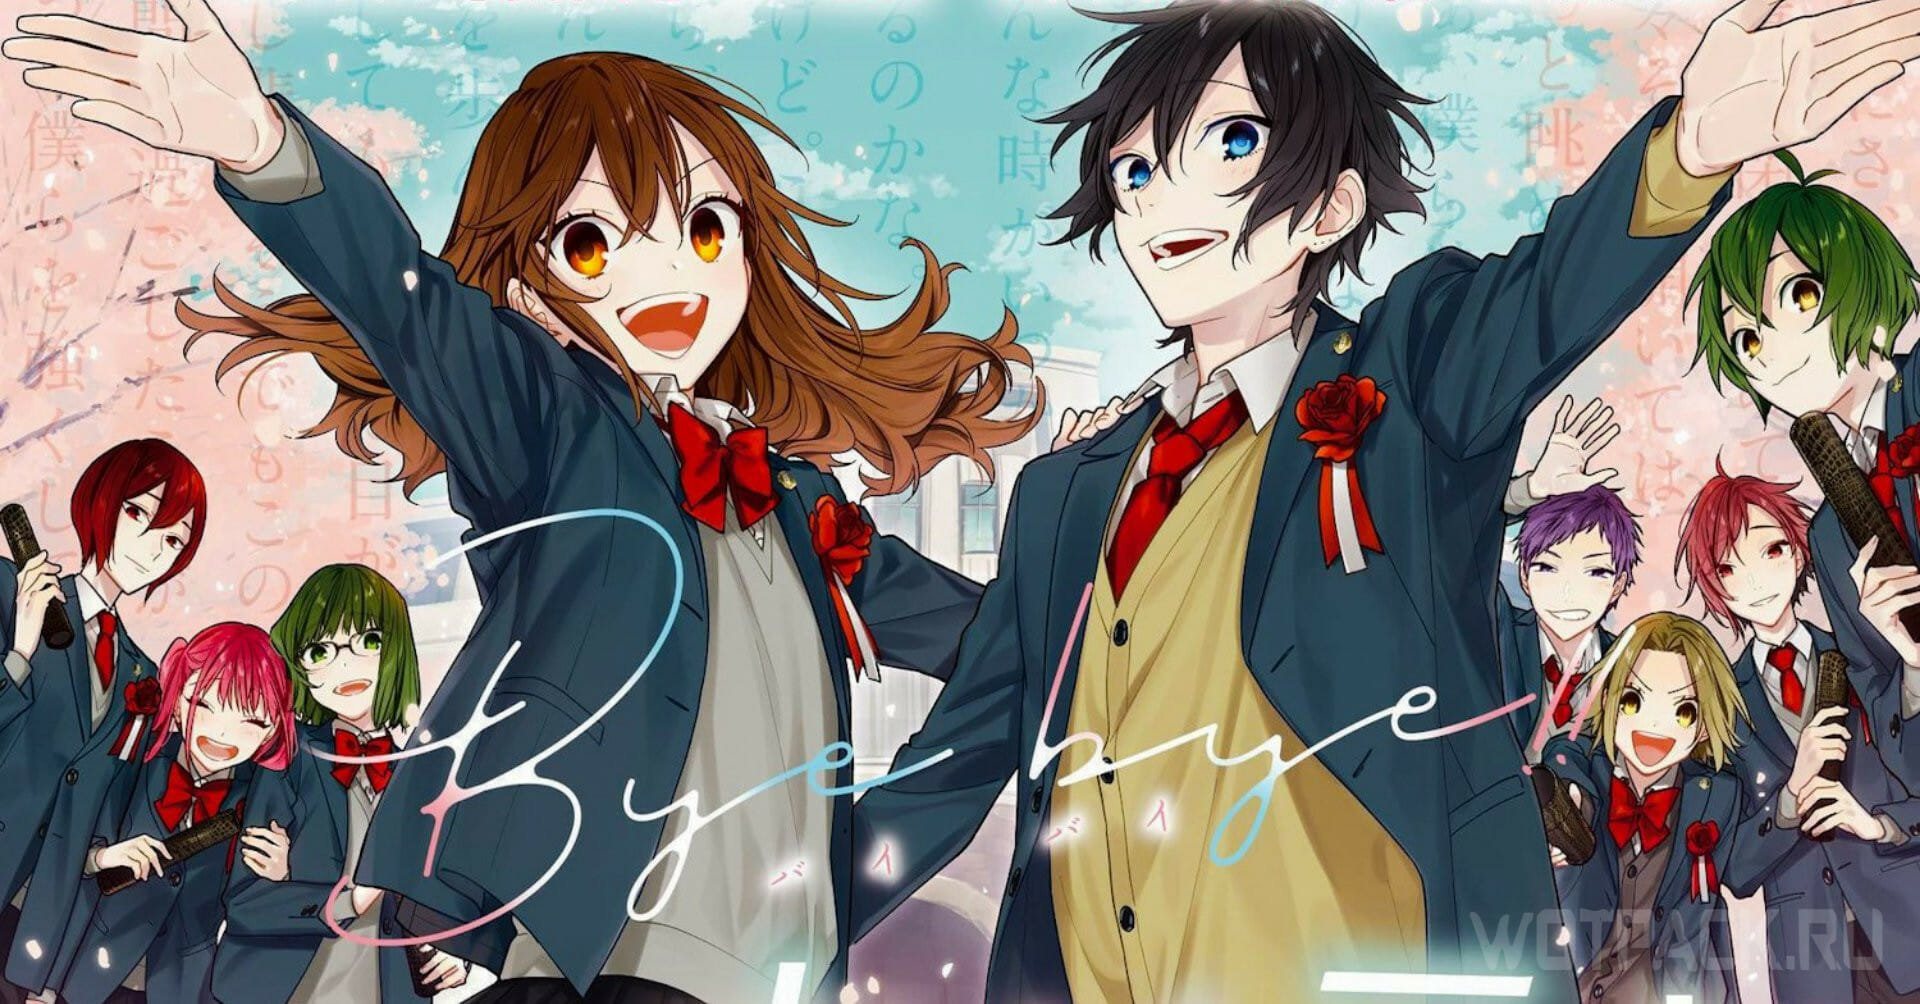 Horimiya: The Missing Pieces Episode 8 Review - Latest Anime News